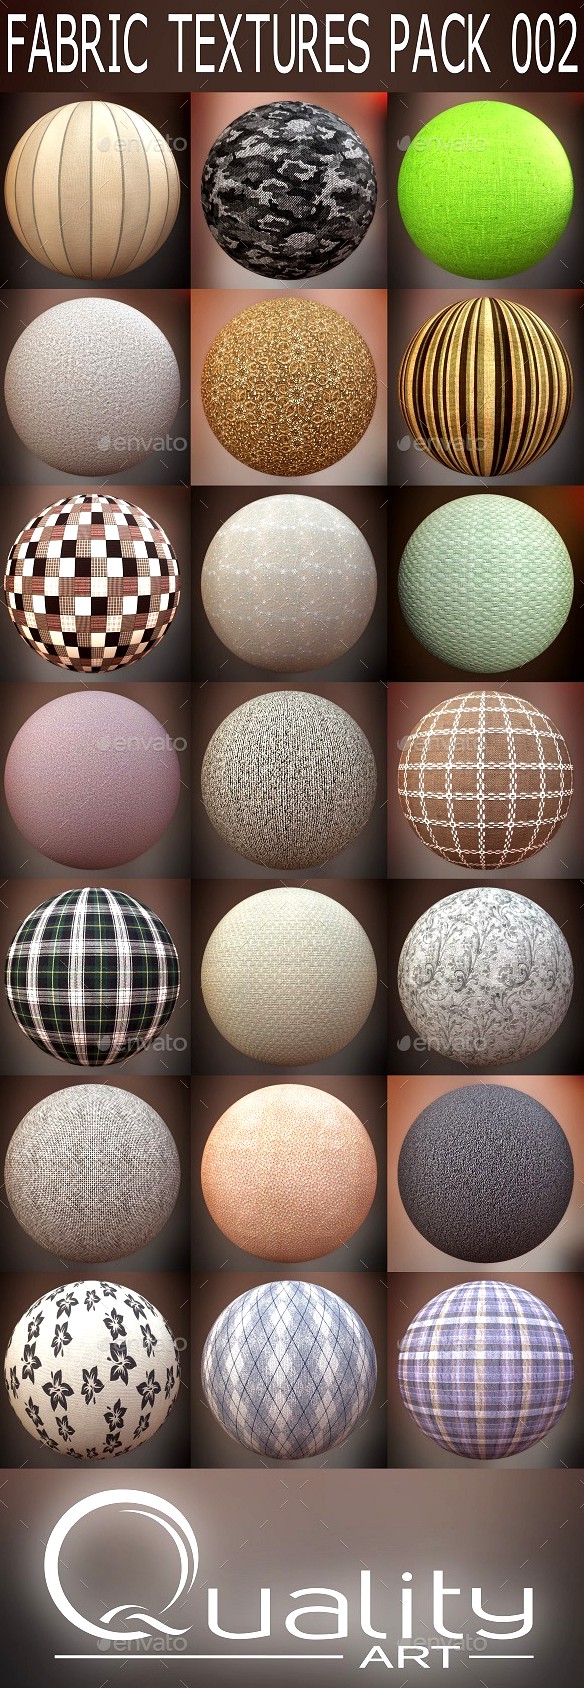 FABRIC TEXTURES PACK 002